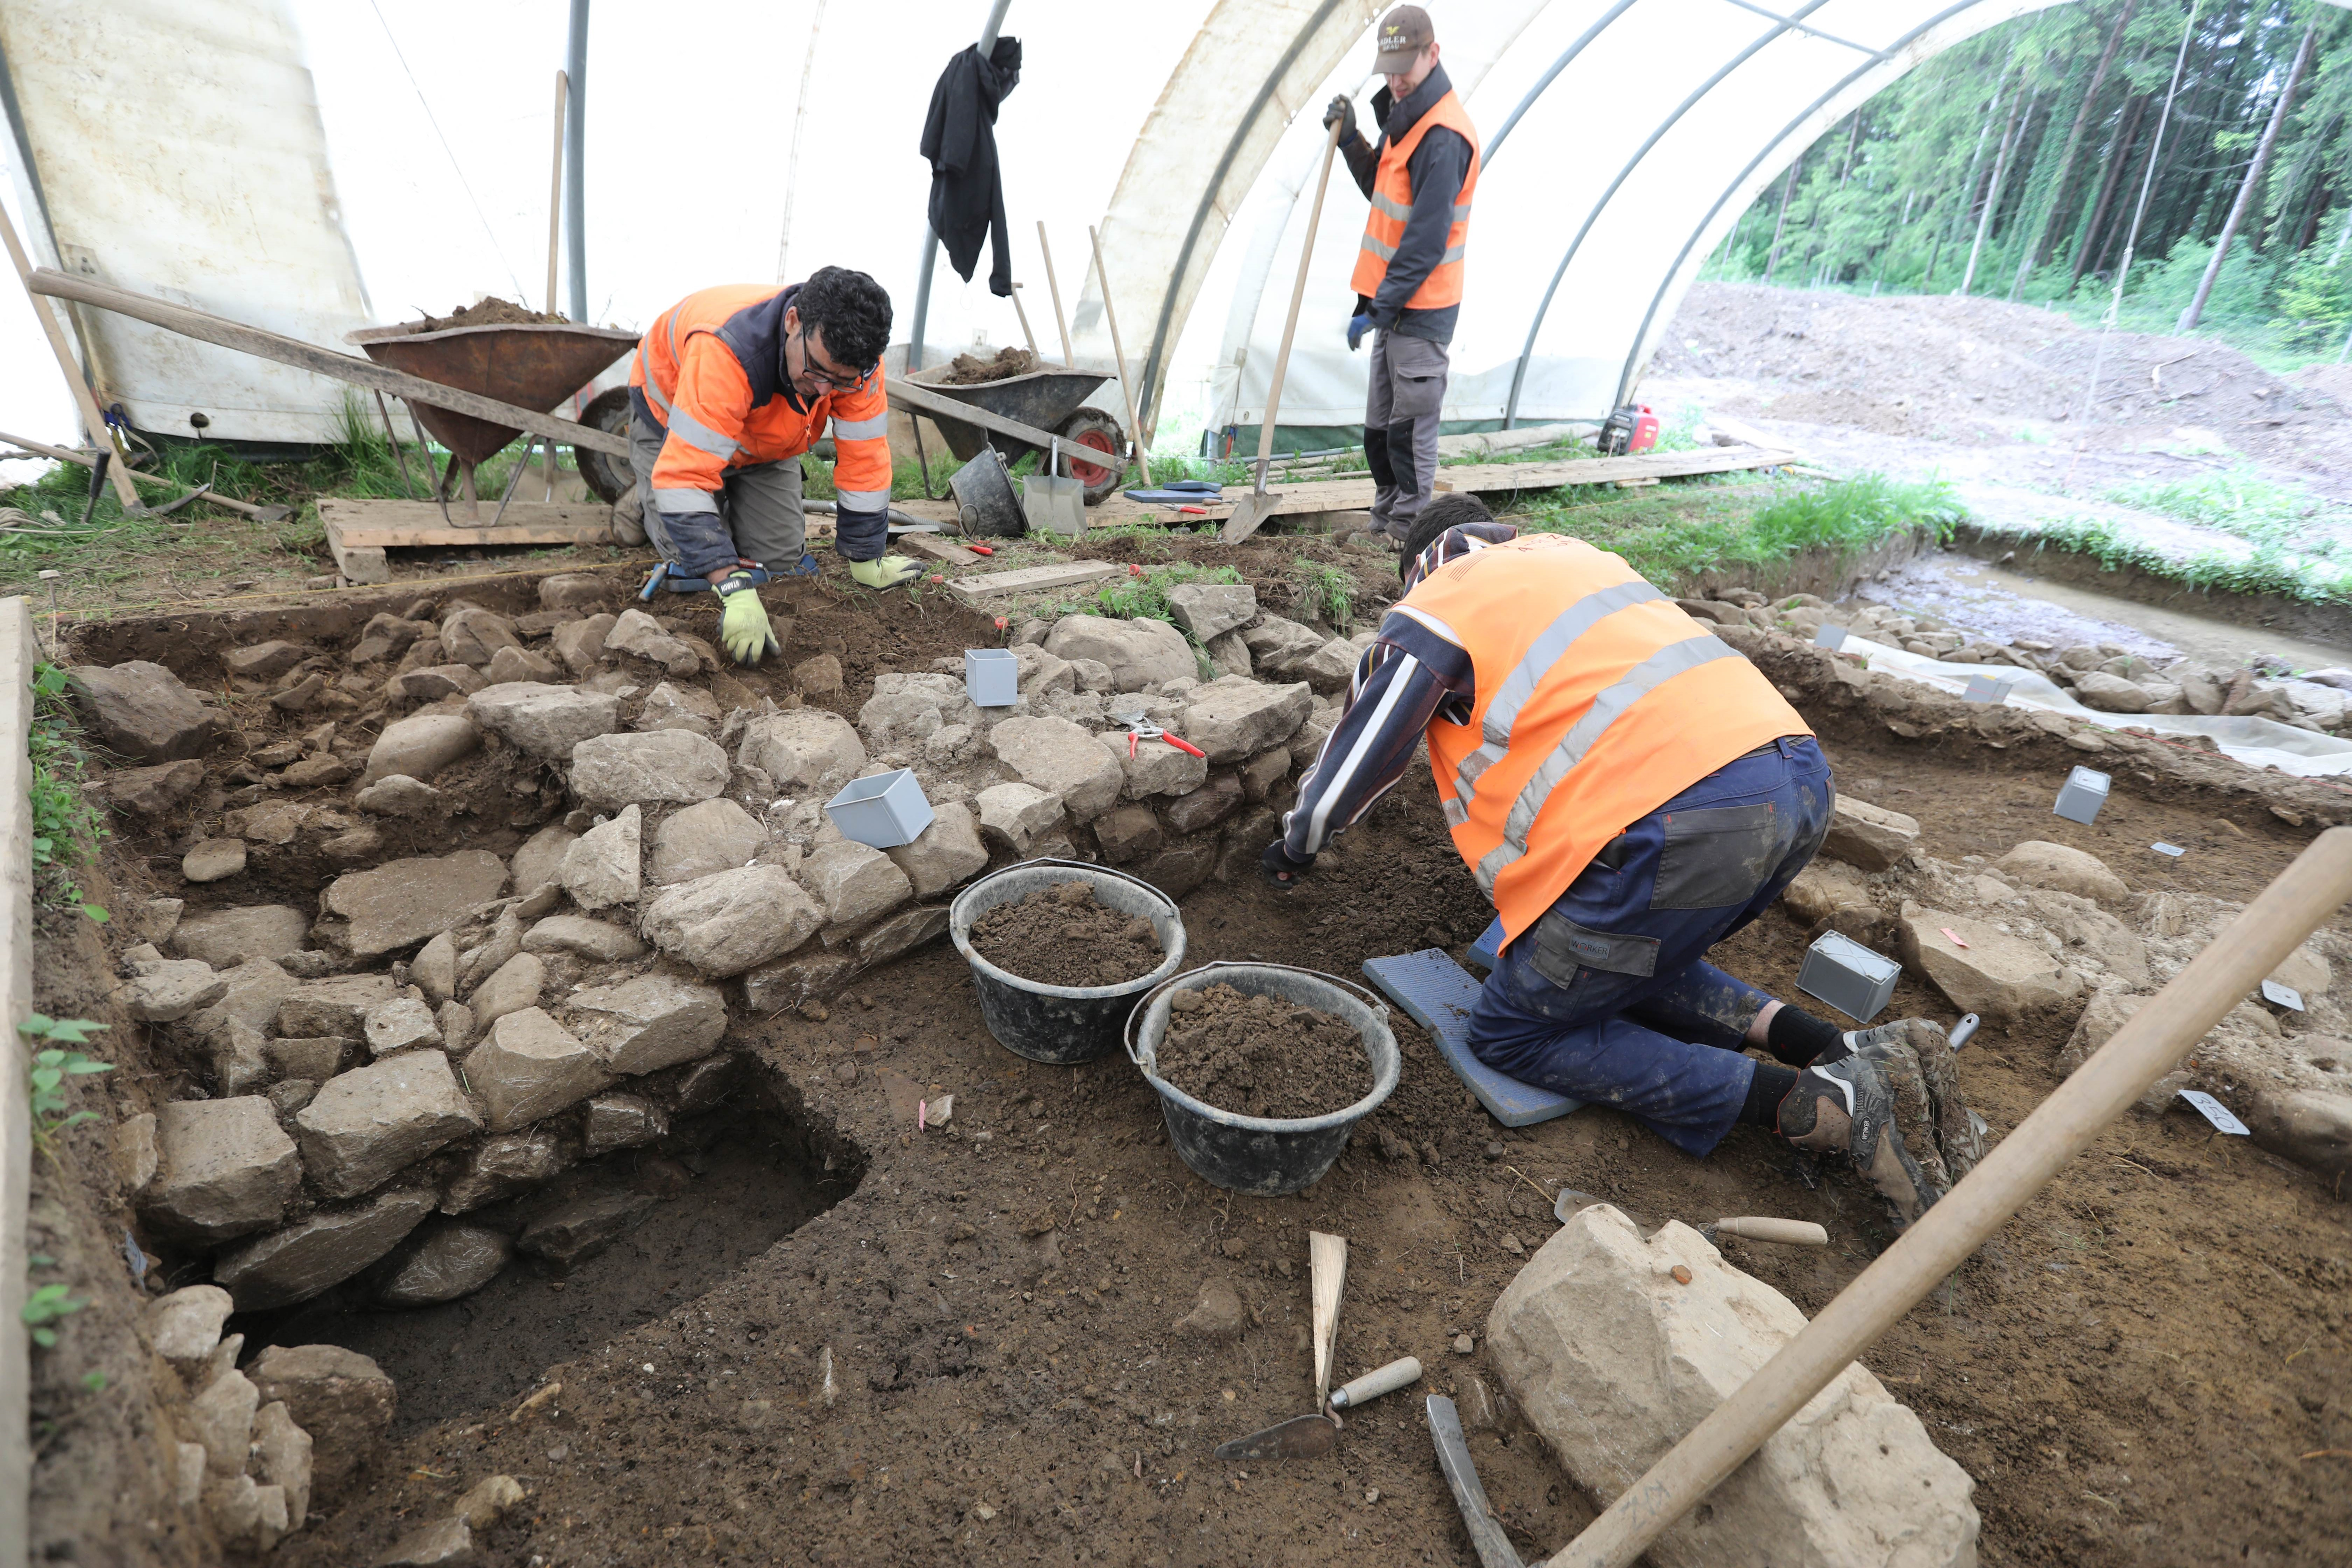 Large Roman building found in Swiss gravel pit – The History Blog